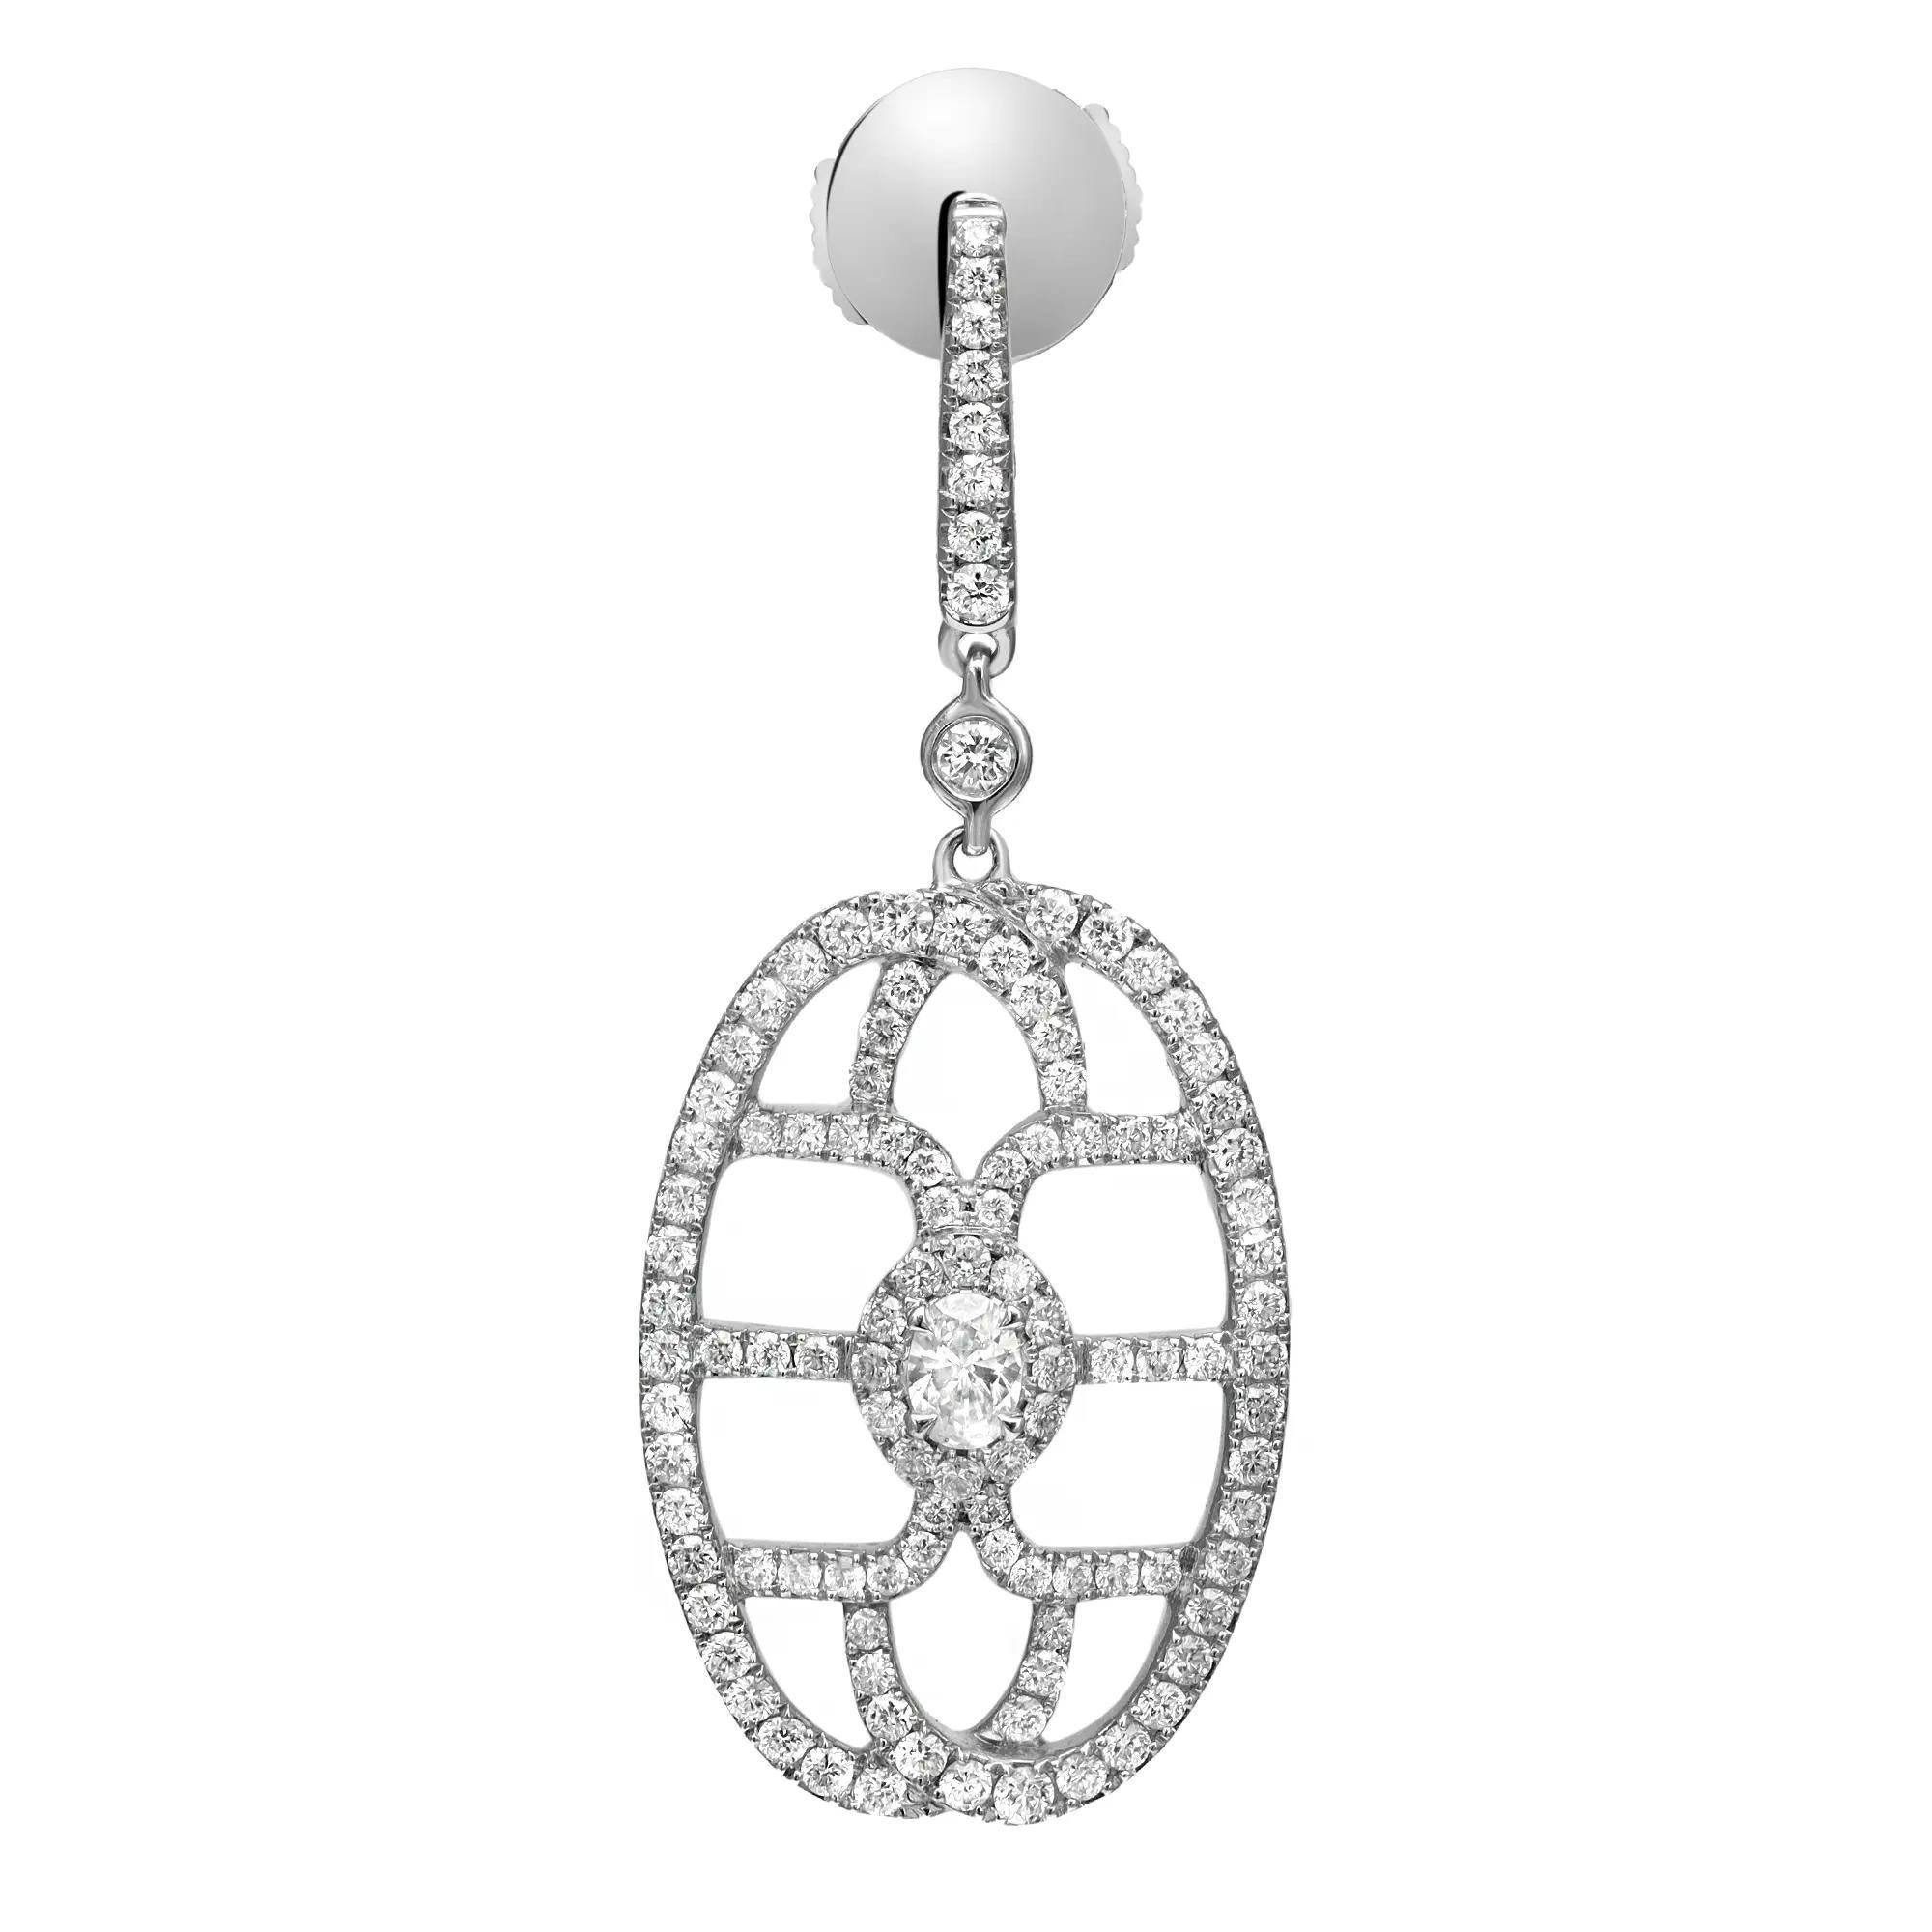 Modern Messika 1.52Cttw New Amazone Diamond Drop Earrings 18K White Gold For Sale